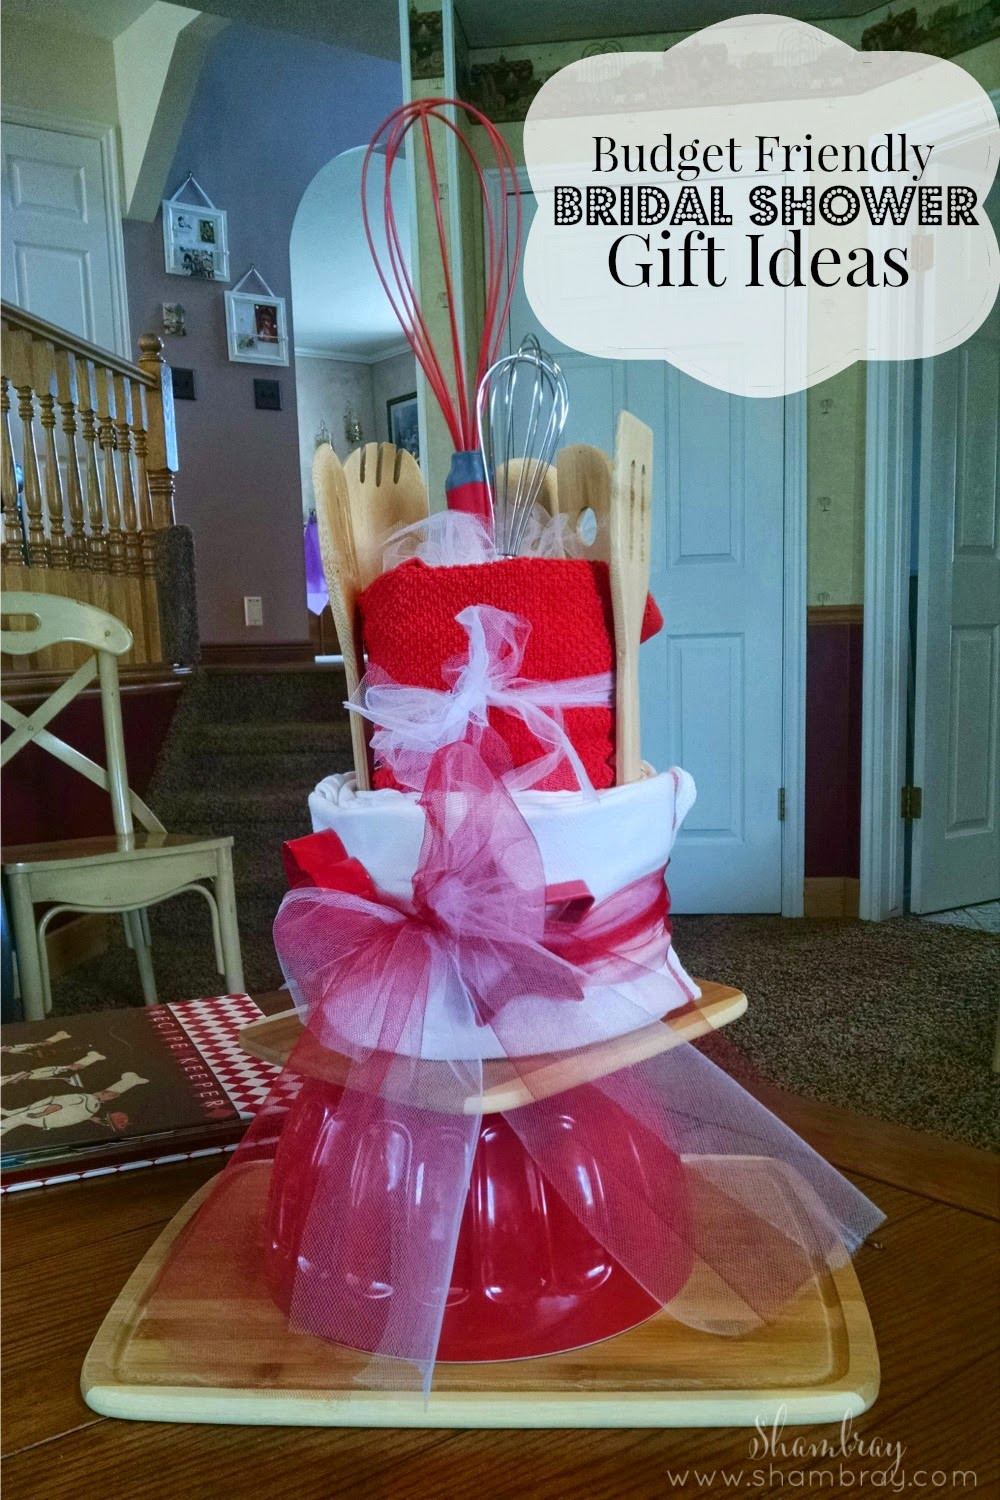 Best ideas about Bridal Shower Gift Ideas For Bride
. Save or Pin Shambray Bud Friendly Bridal Shower Gift Ideas Now.